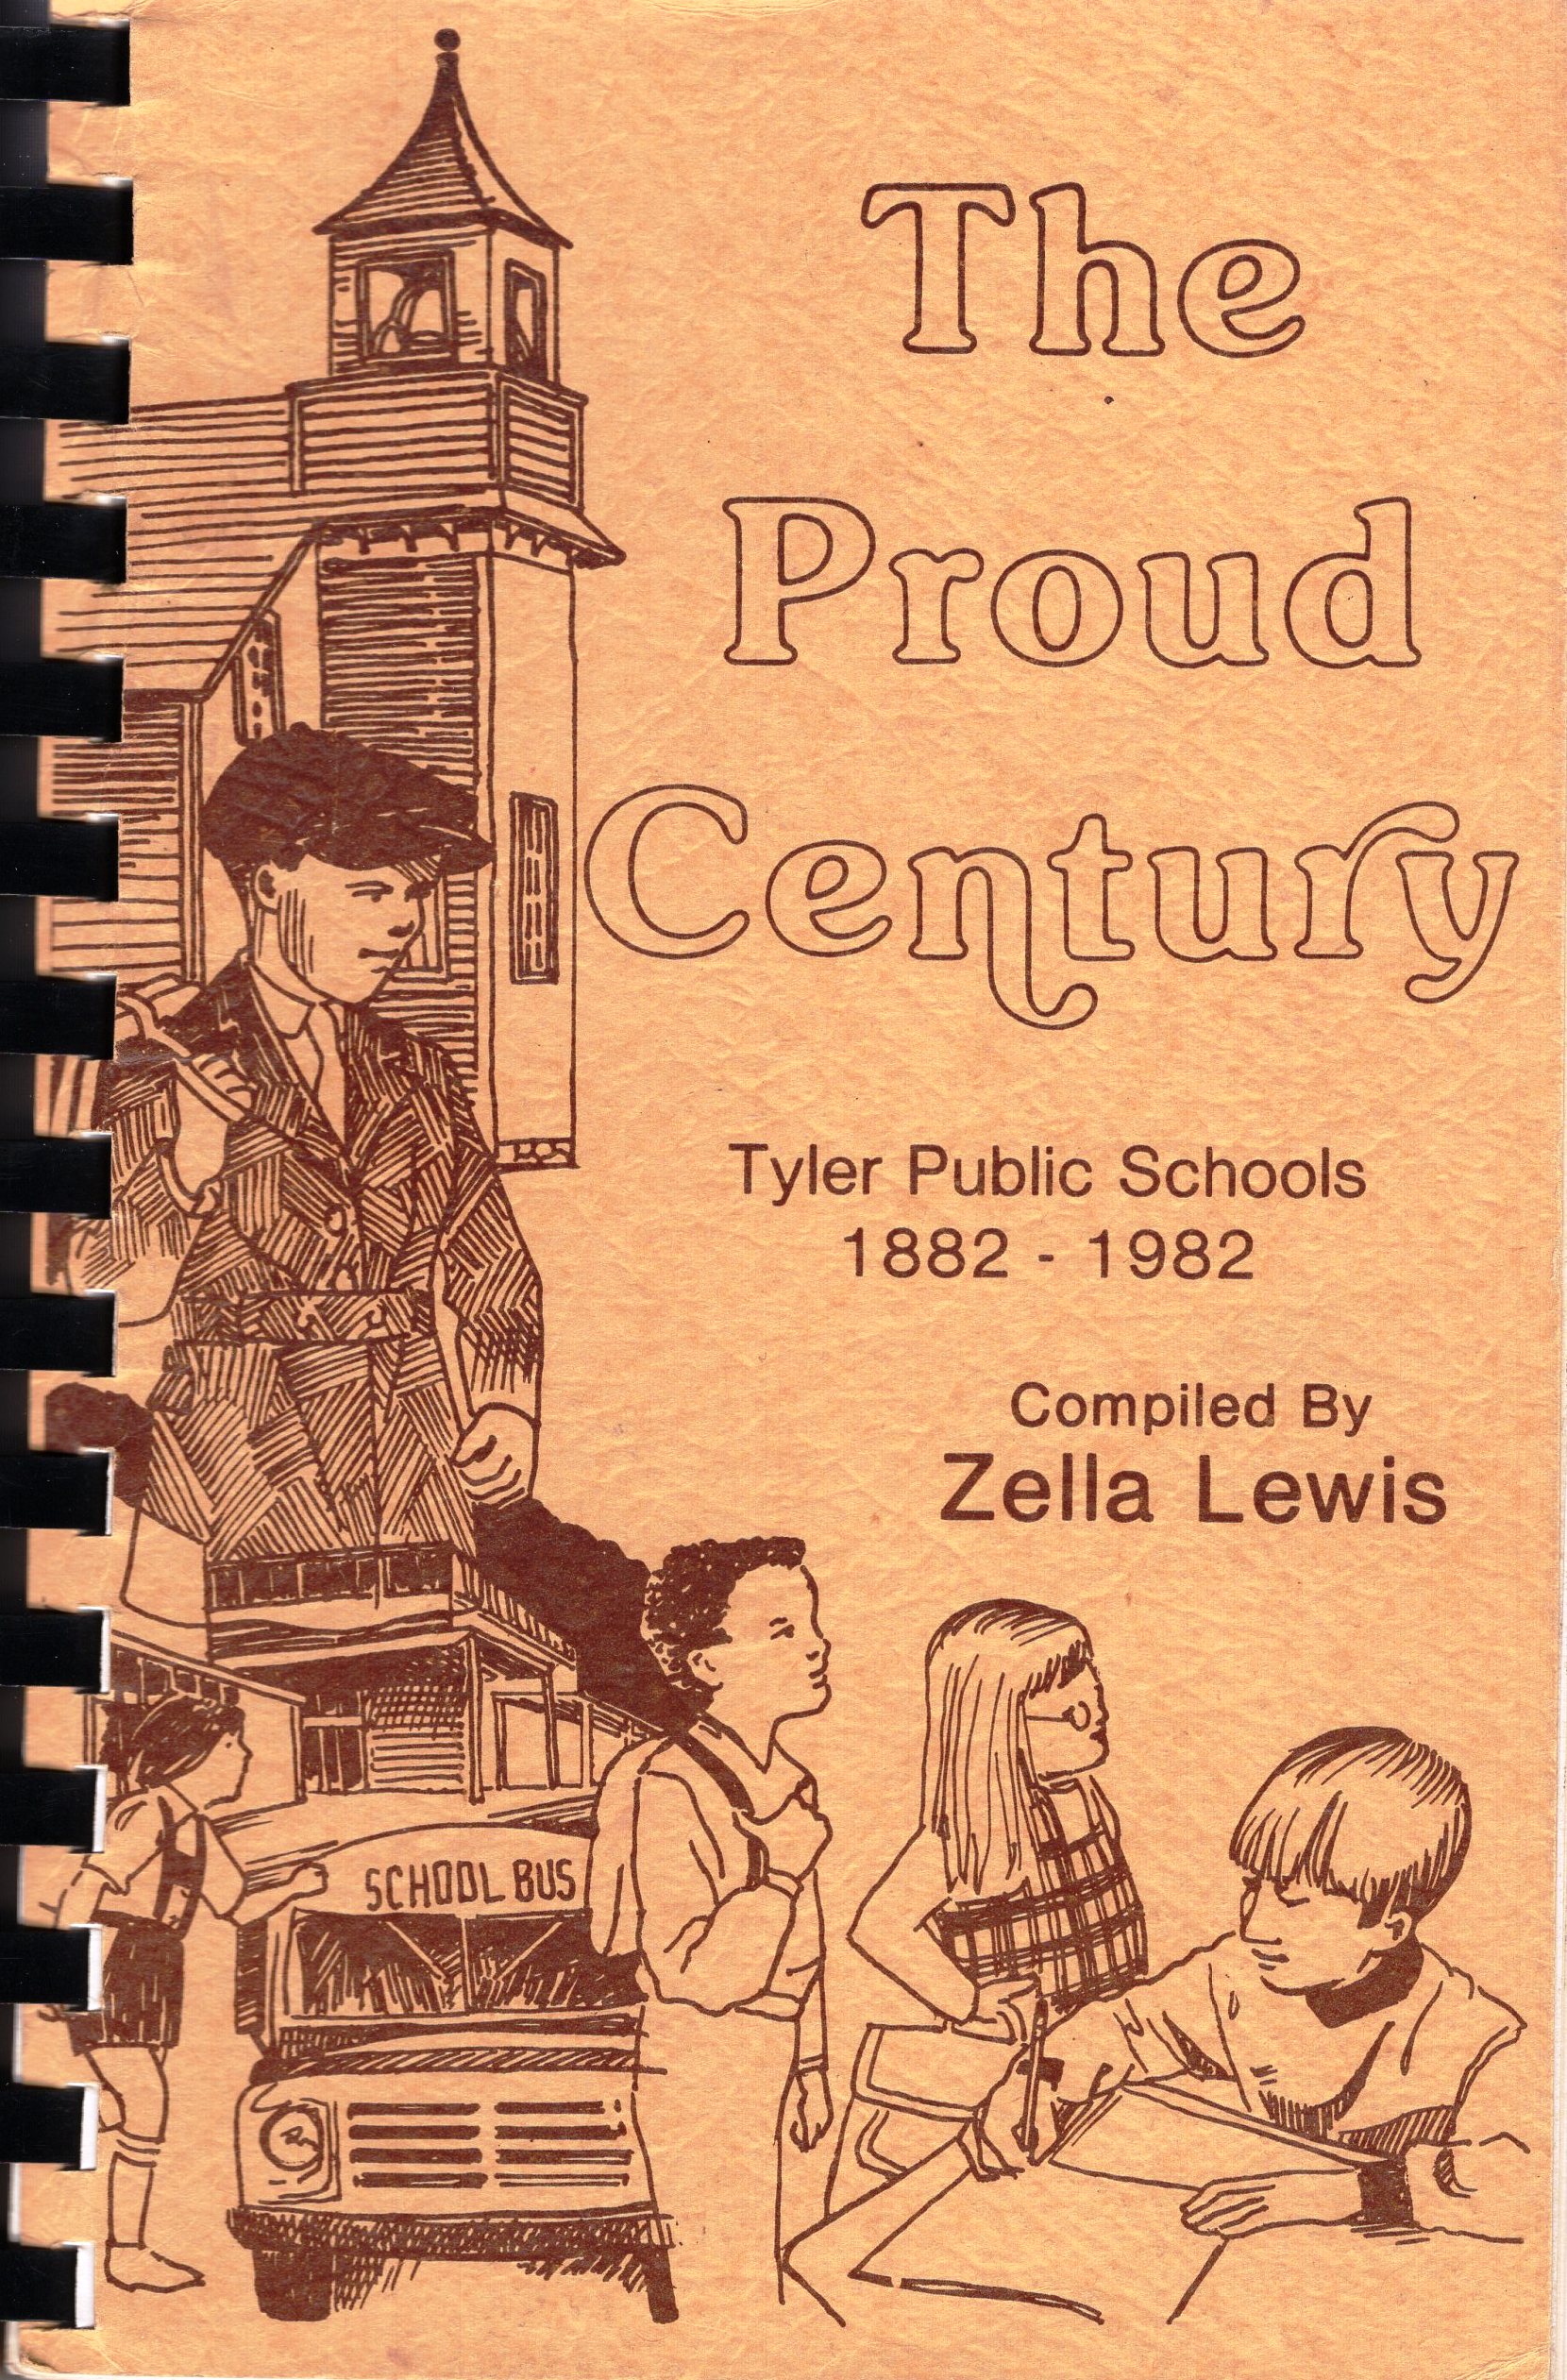 Be It Remembered: The First Century of Public Education in Tyler, 1882-1982, by Zella Lewis,